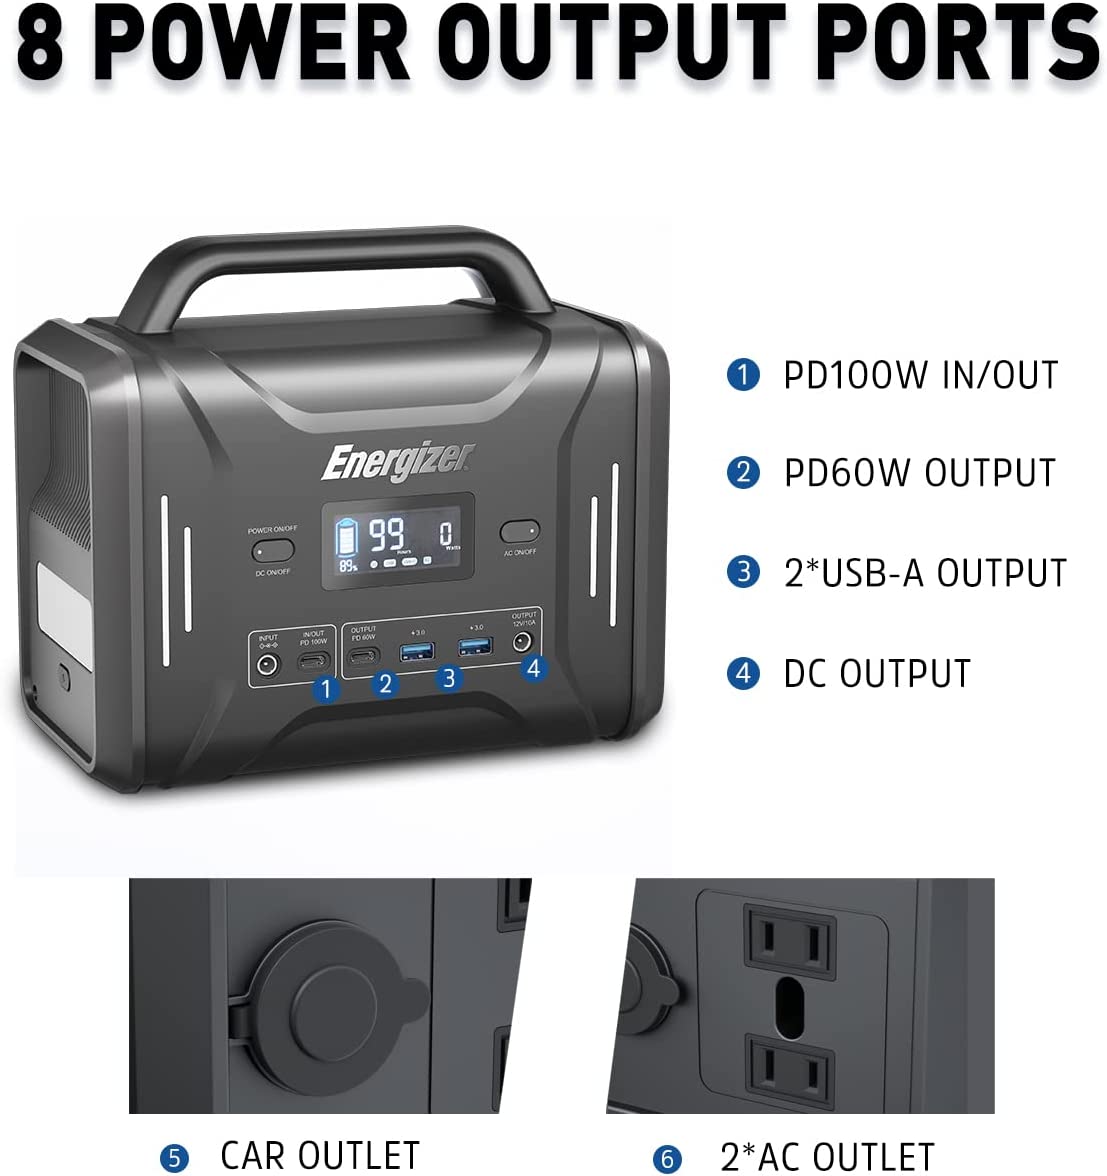 Energizer PPS320 Portable Power Station uses a handle design that is suitable for hiking, camping&traveling, and easily charges your mobile devices. Built-in LiFePO4 battery with BMS offers 3,500+ life cycles&10 years of battery life. As a mini solar generator can be easily charged by PD 100W, AC, solar panel, and car.